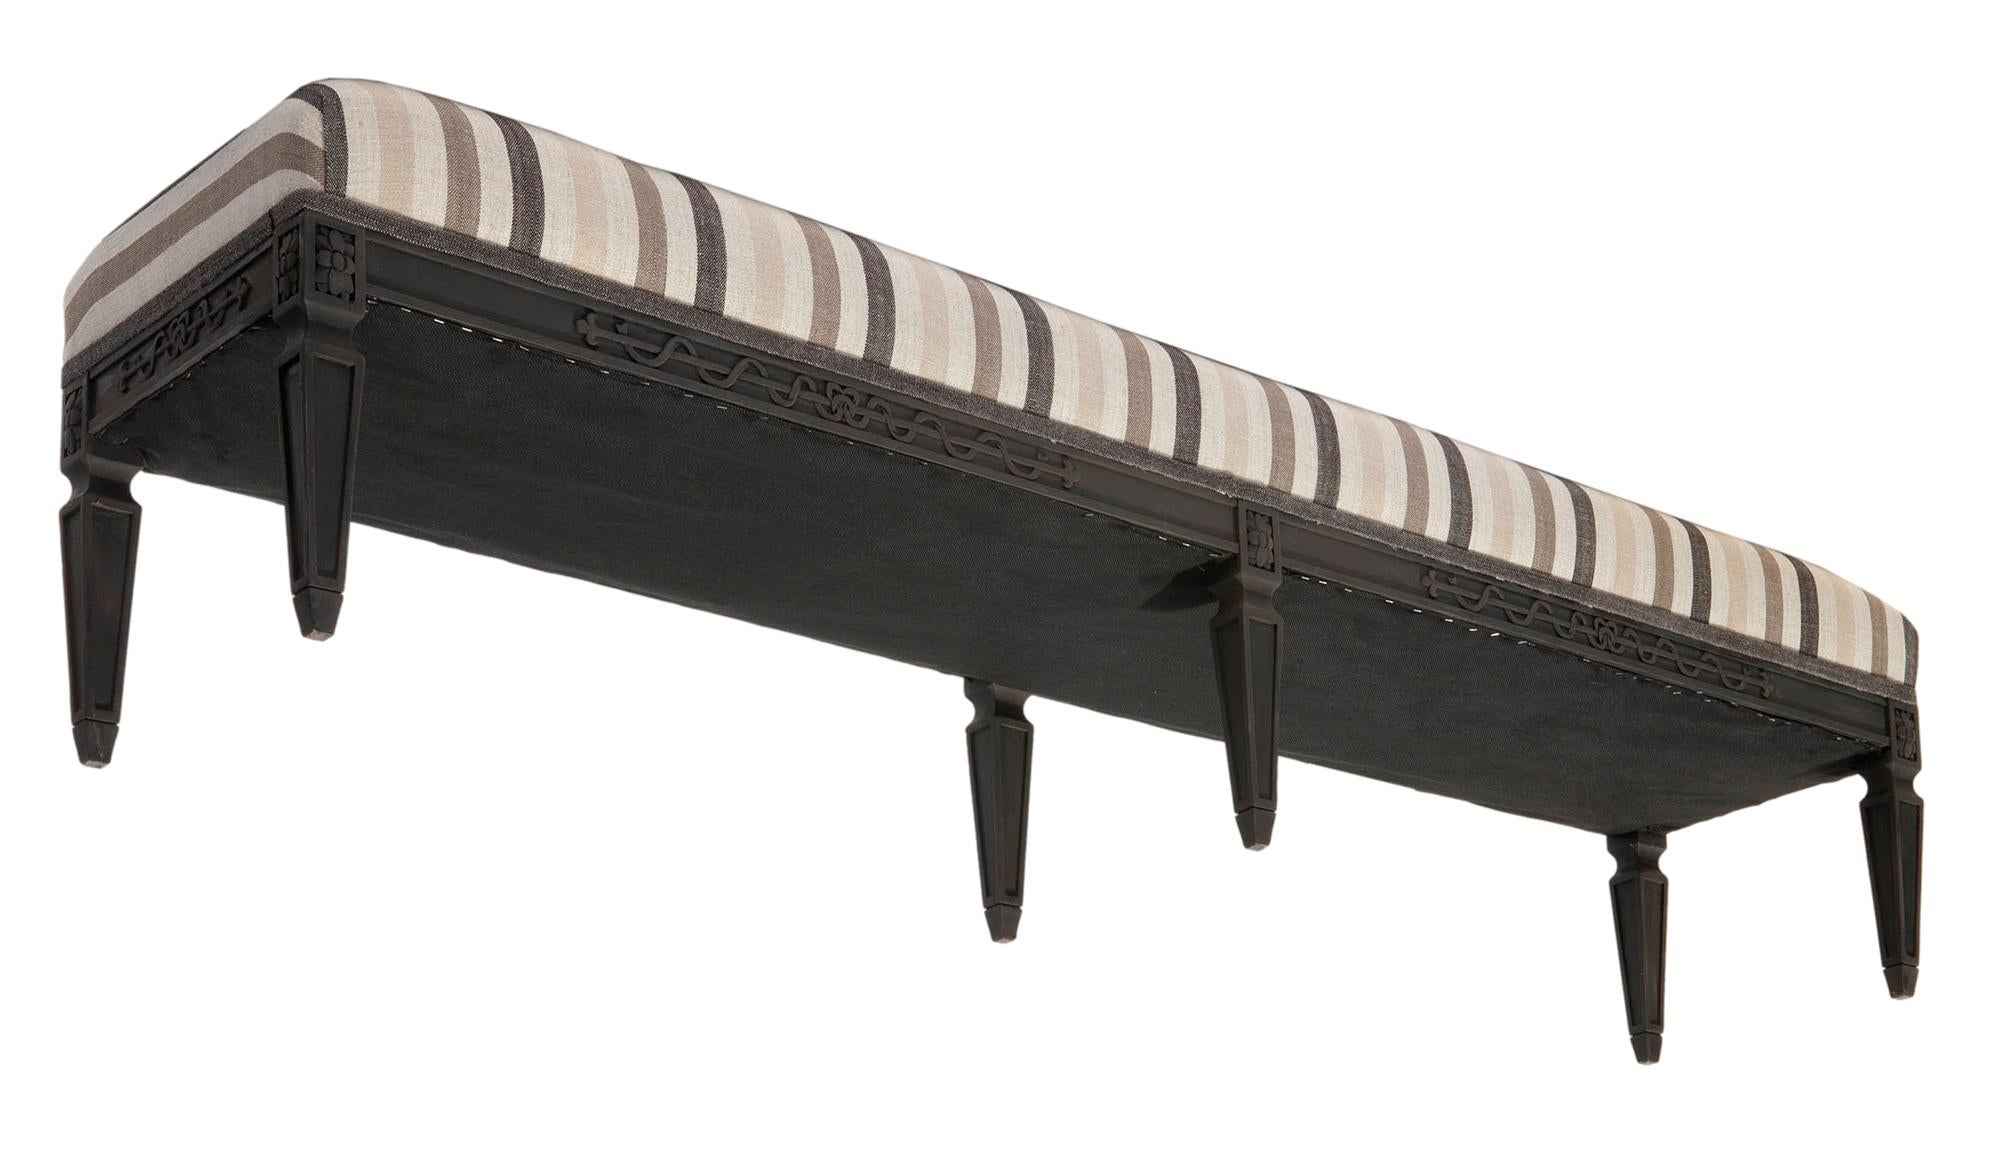 French Provincial Long Bench with Italian Stripped Linen